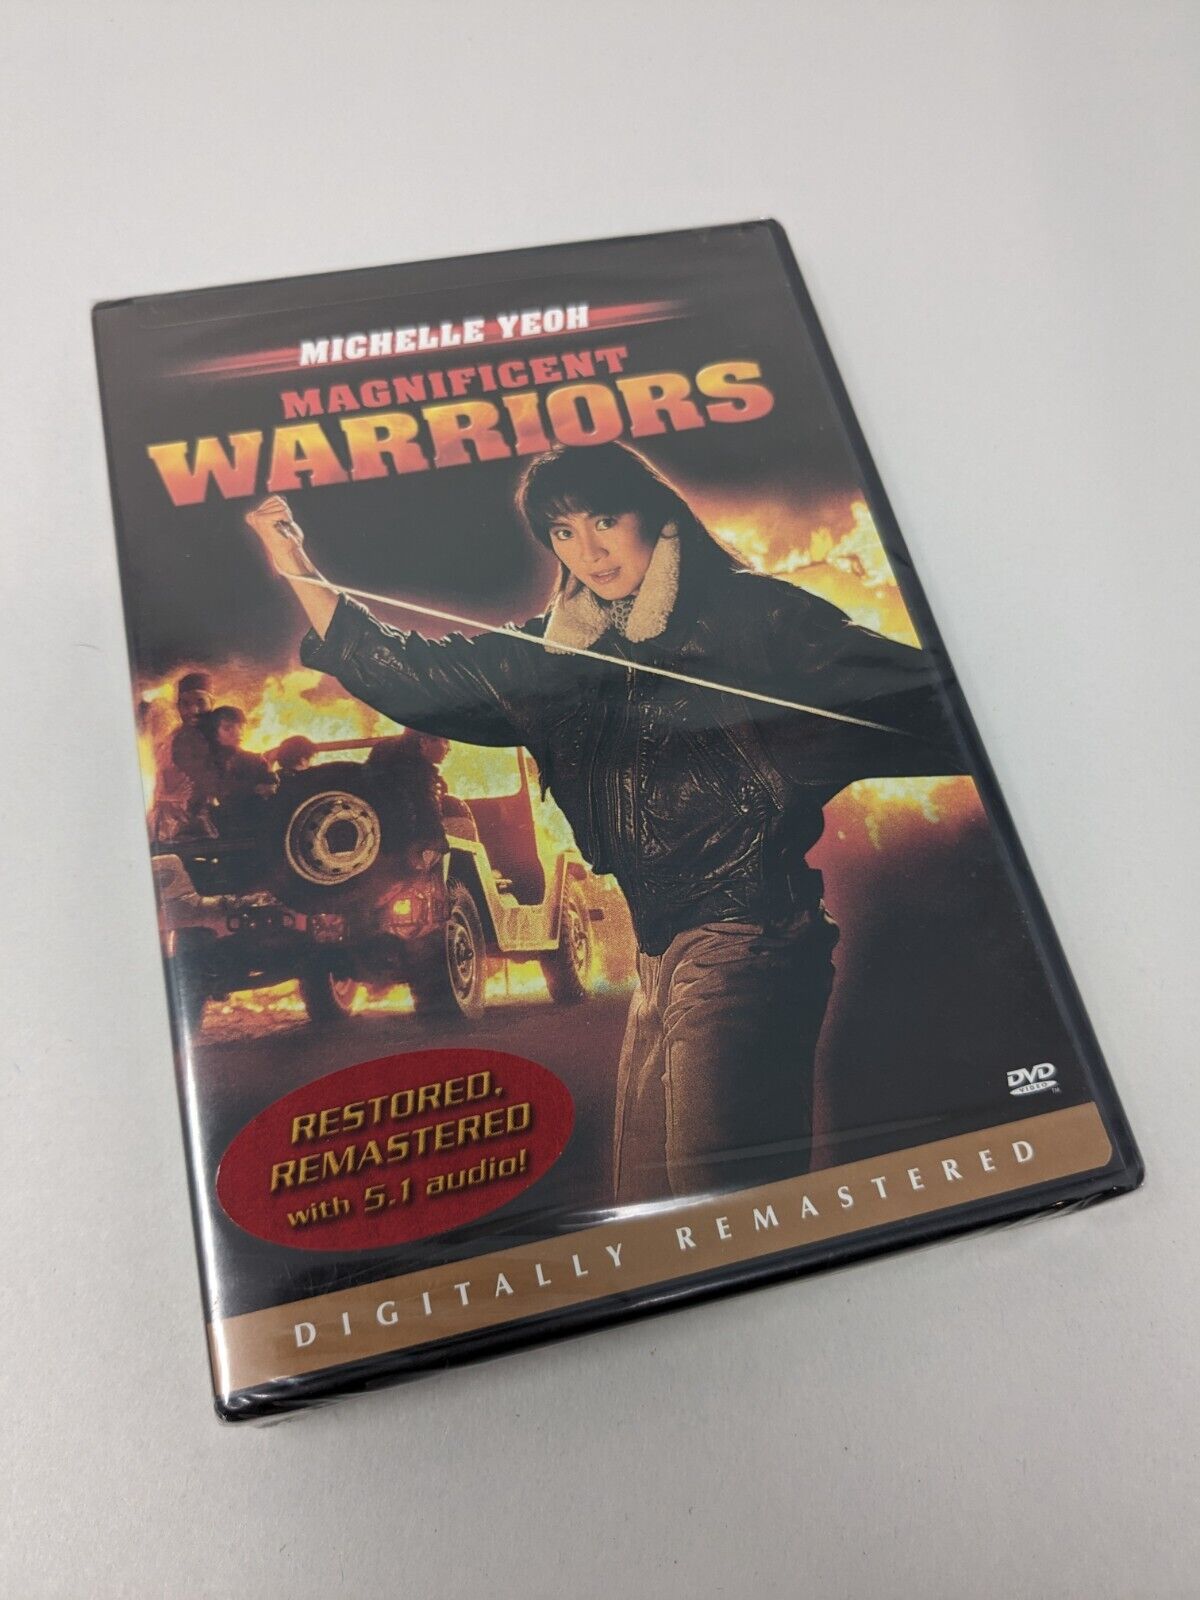 MAGNIFICENT WARRIORS (1987) DVD, Michelle Yeoh, Martial Arts New Sealed